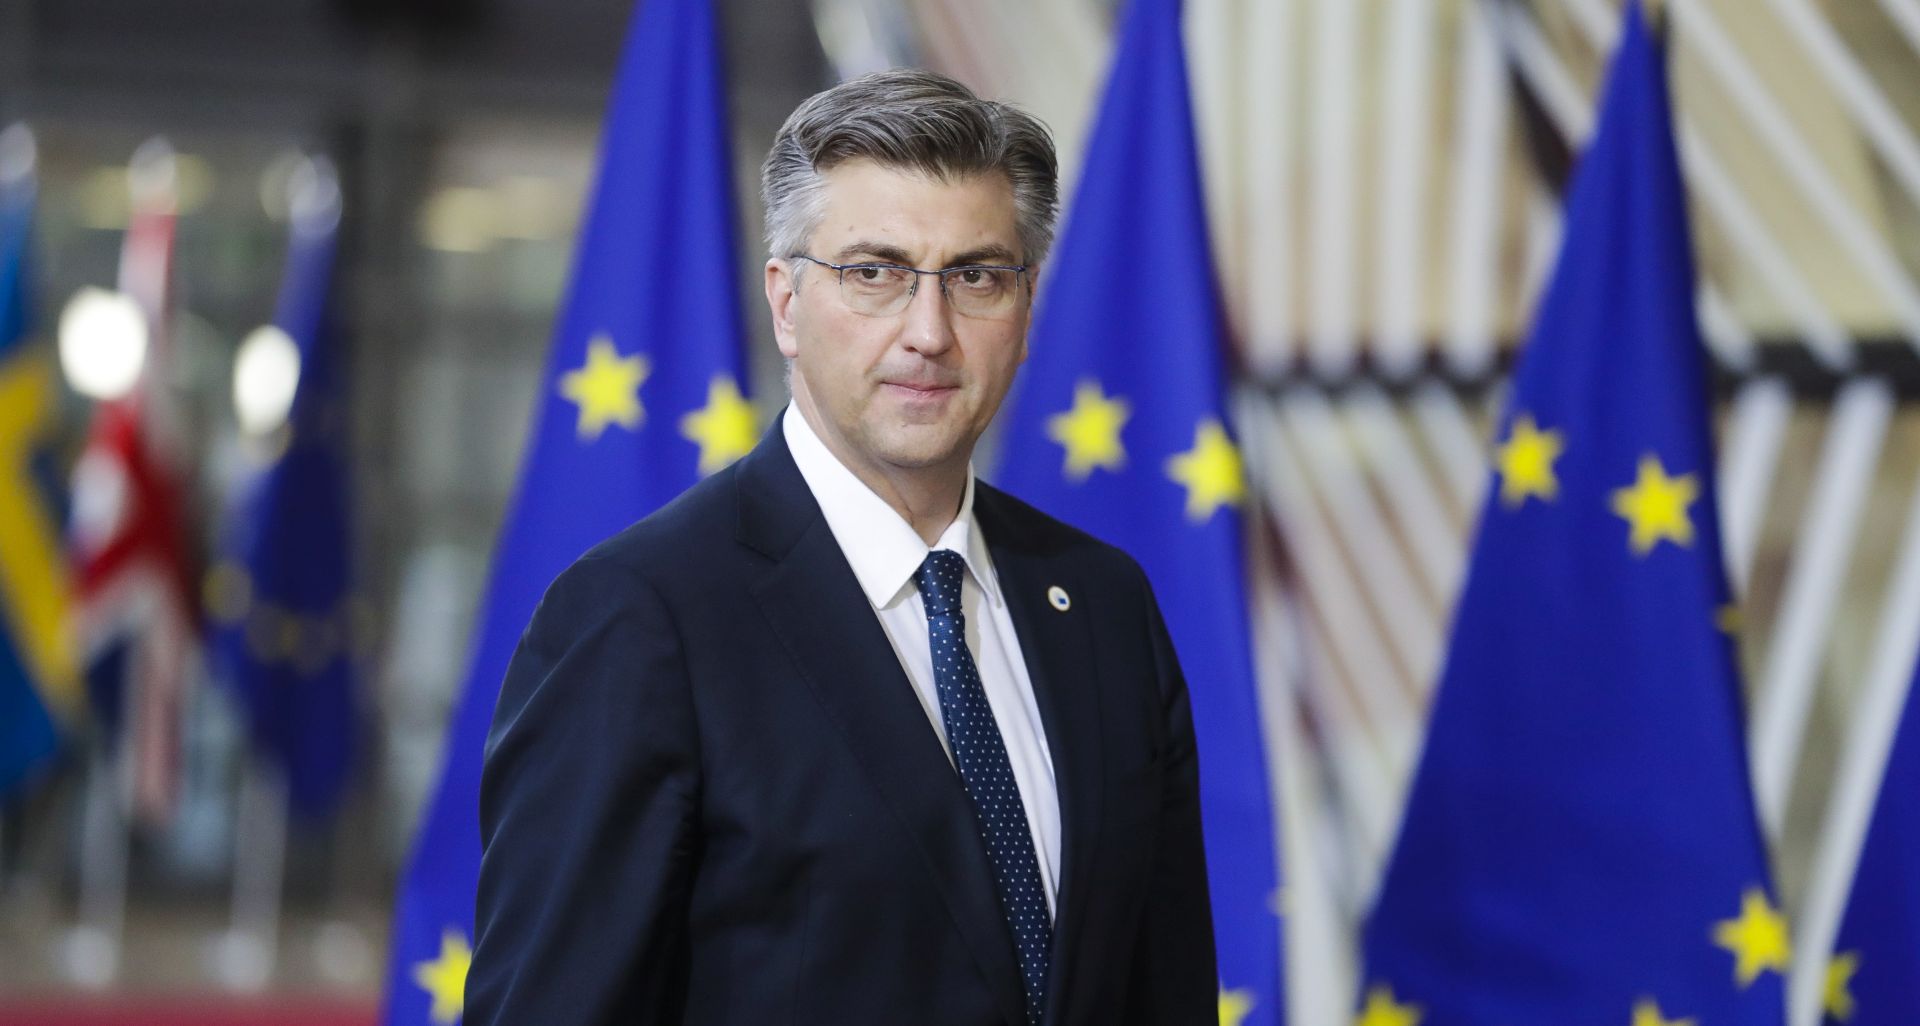 epa07453335 Croatian Prime Minister Andrej Plenkovic arrives at the European Council summit in Brussels, Belgium, 21 March 2019. European Union leaders gather for a two-day summit to discuss, among others, Brexit and British PM request to extend Article 50.  EPA/STEPHANIE LECOCQ